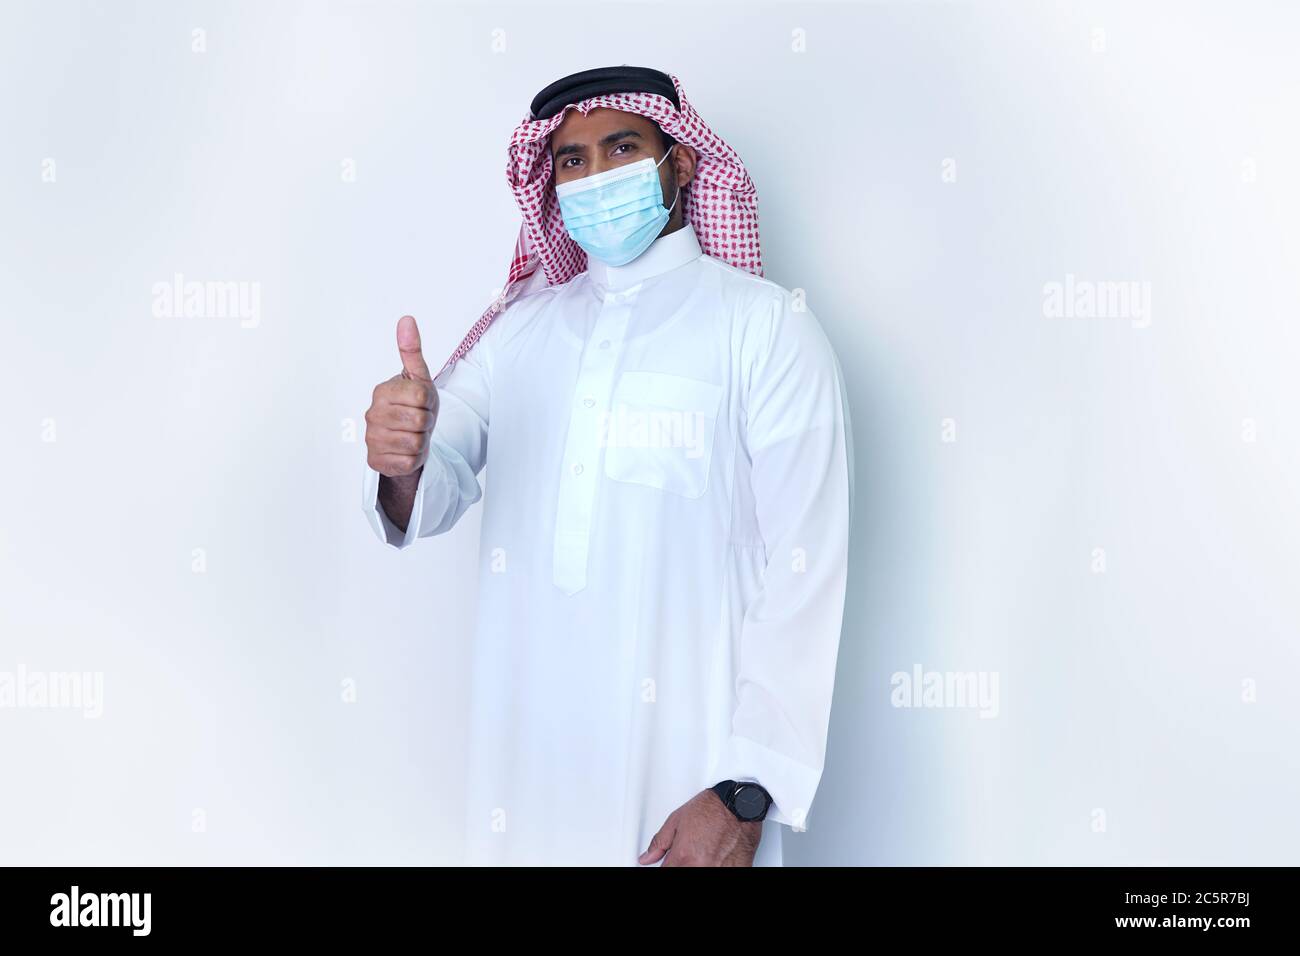 Saudi Arab Man standing in confidence showing thumps up after taking precautions due to Covid19 Stock Photo